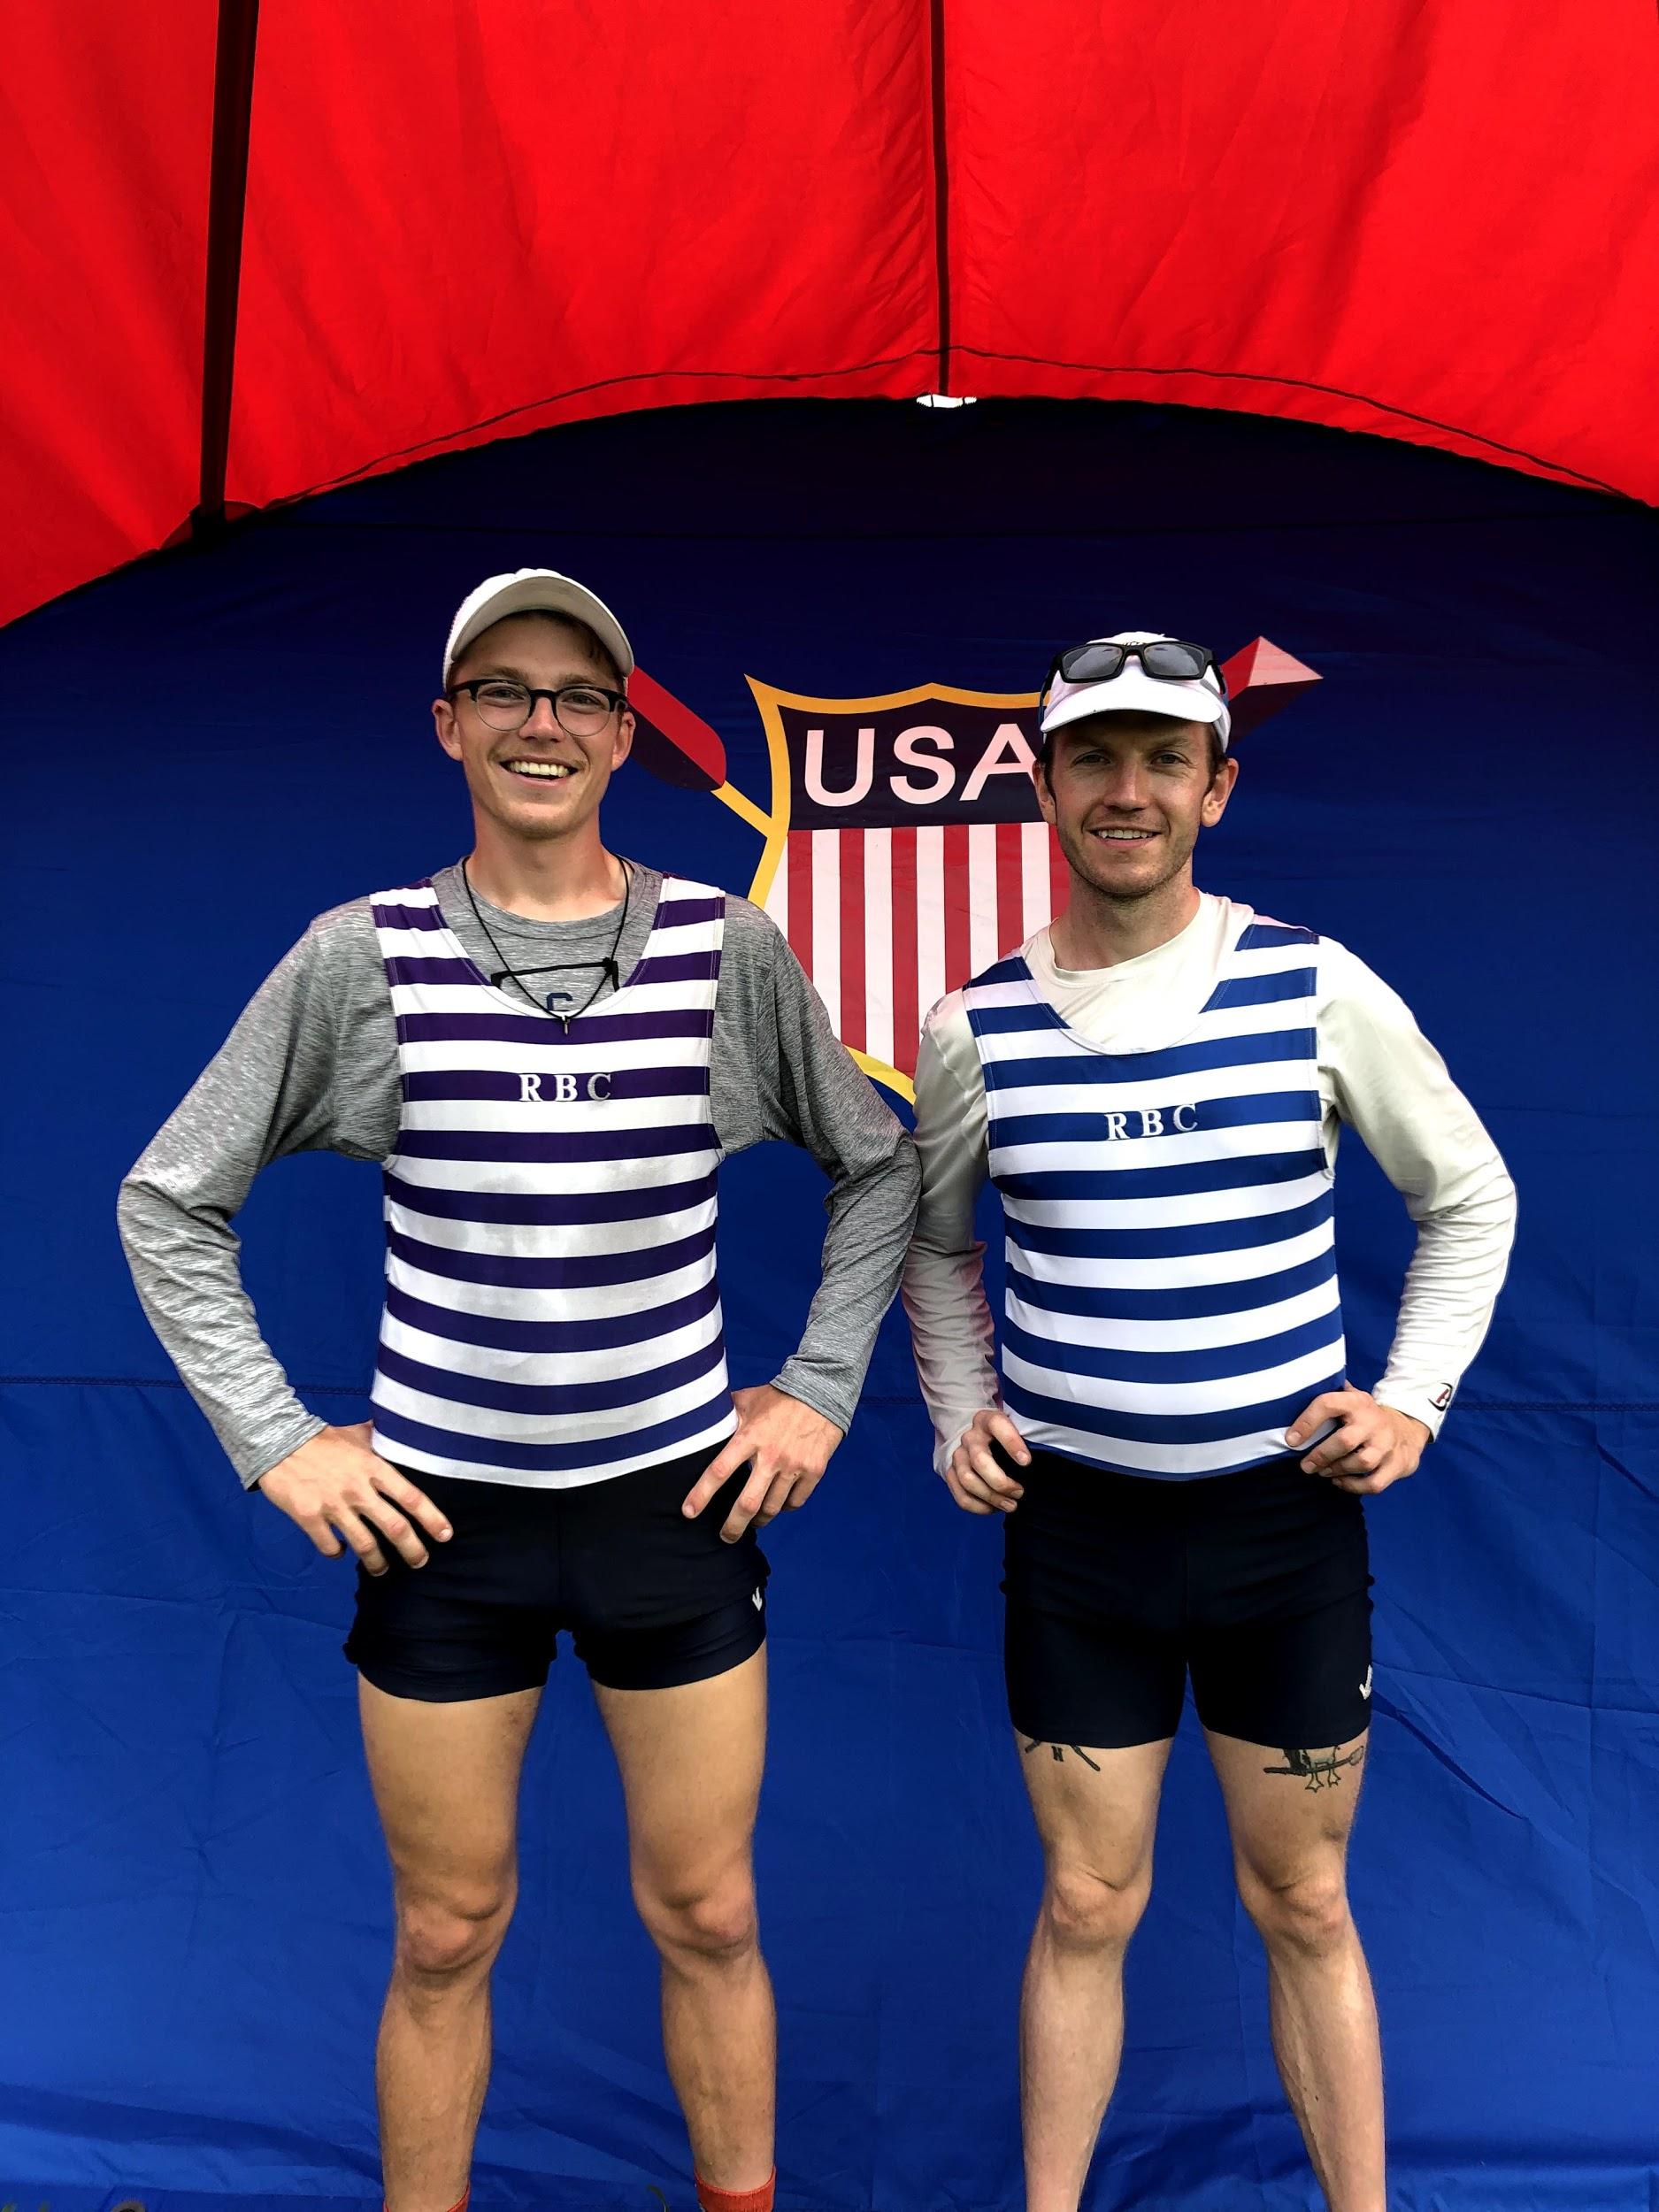 The pair representing in their RBC Stripes!